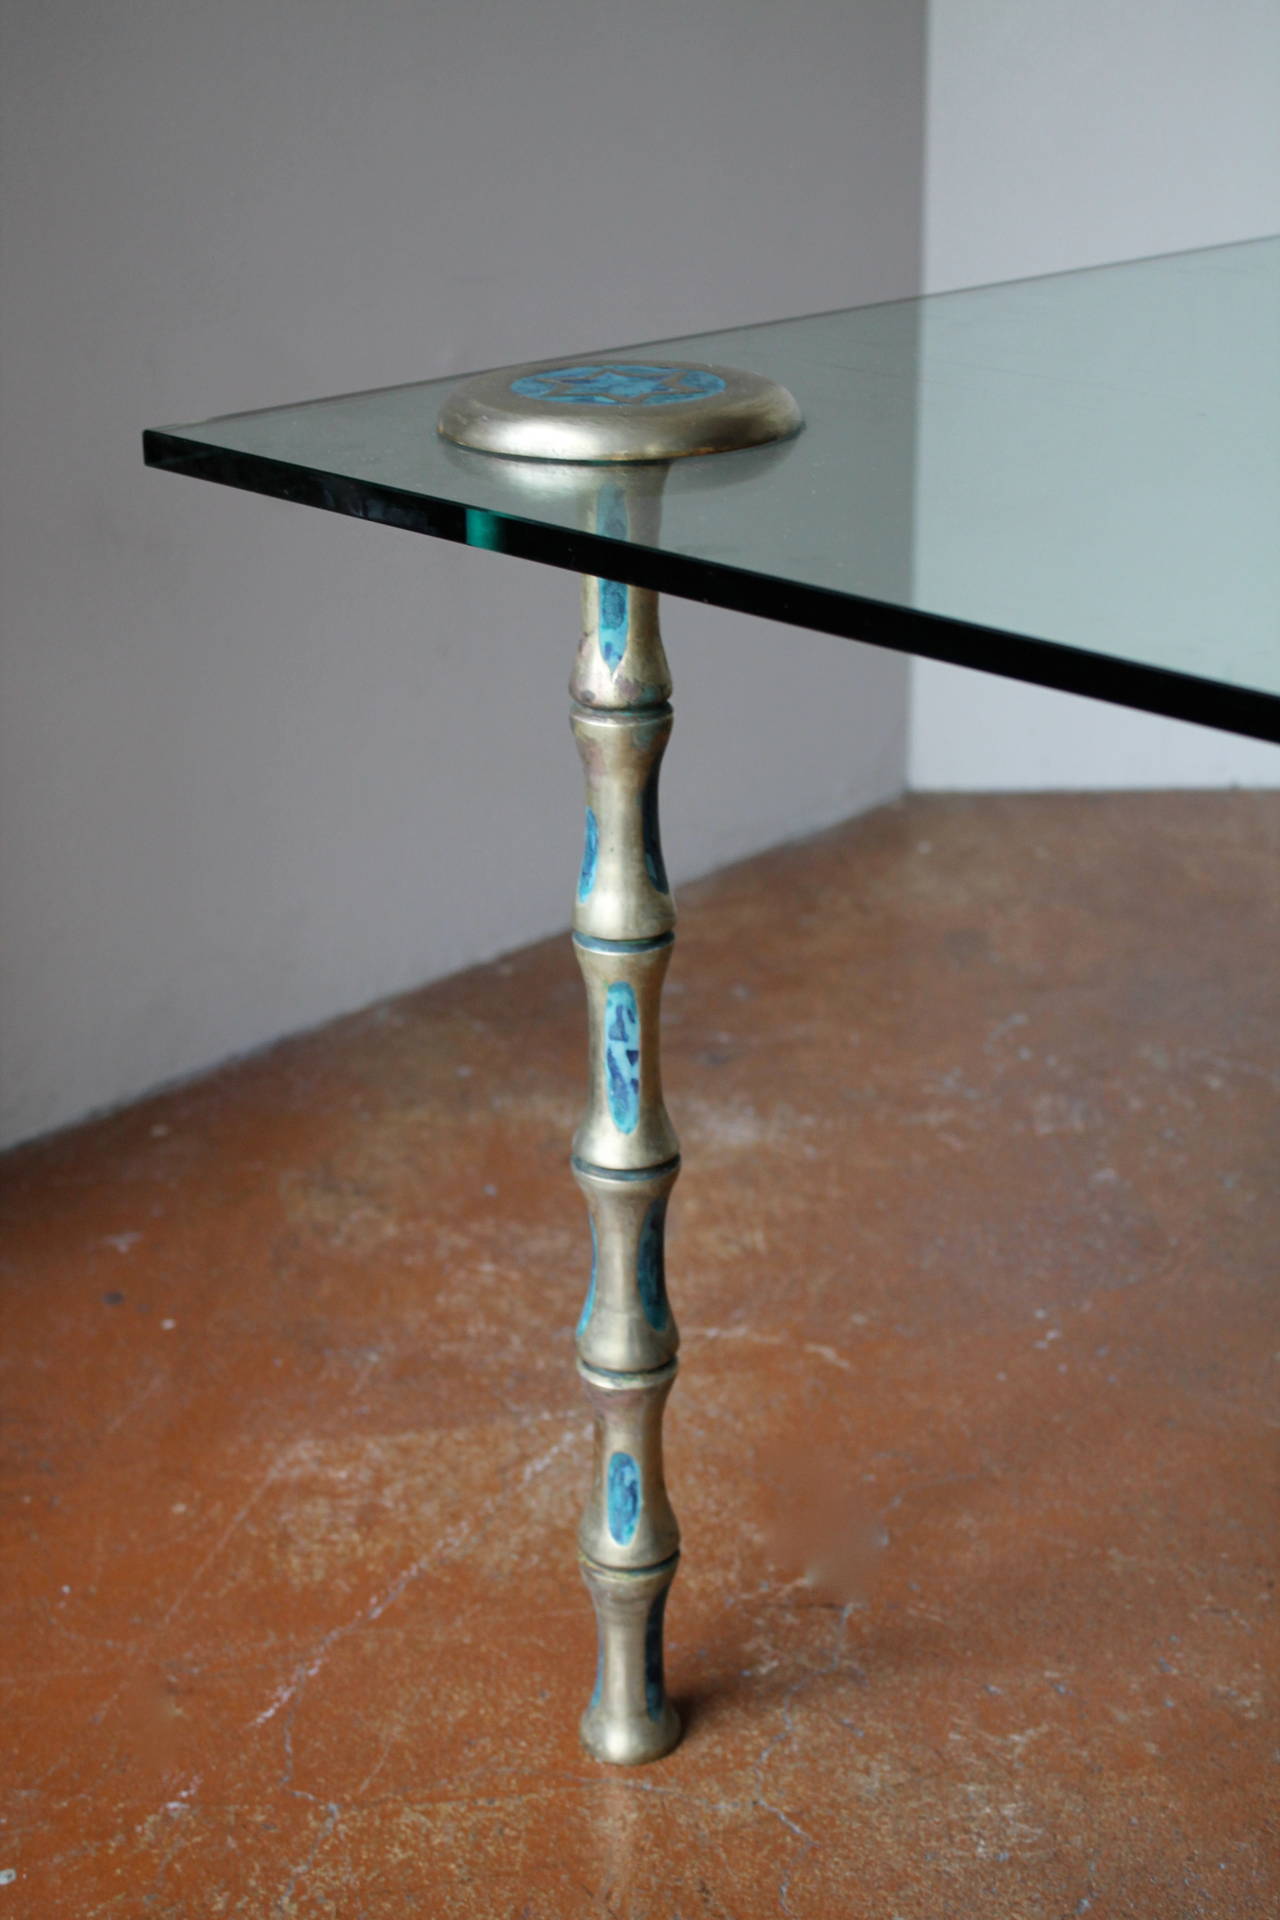 Rare Brass Bamboo Coffee Table by Pepe Mendoza, Mexico City, 1958 For Sale 1